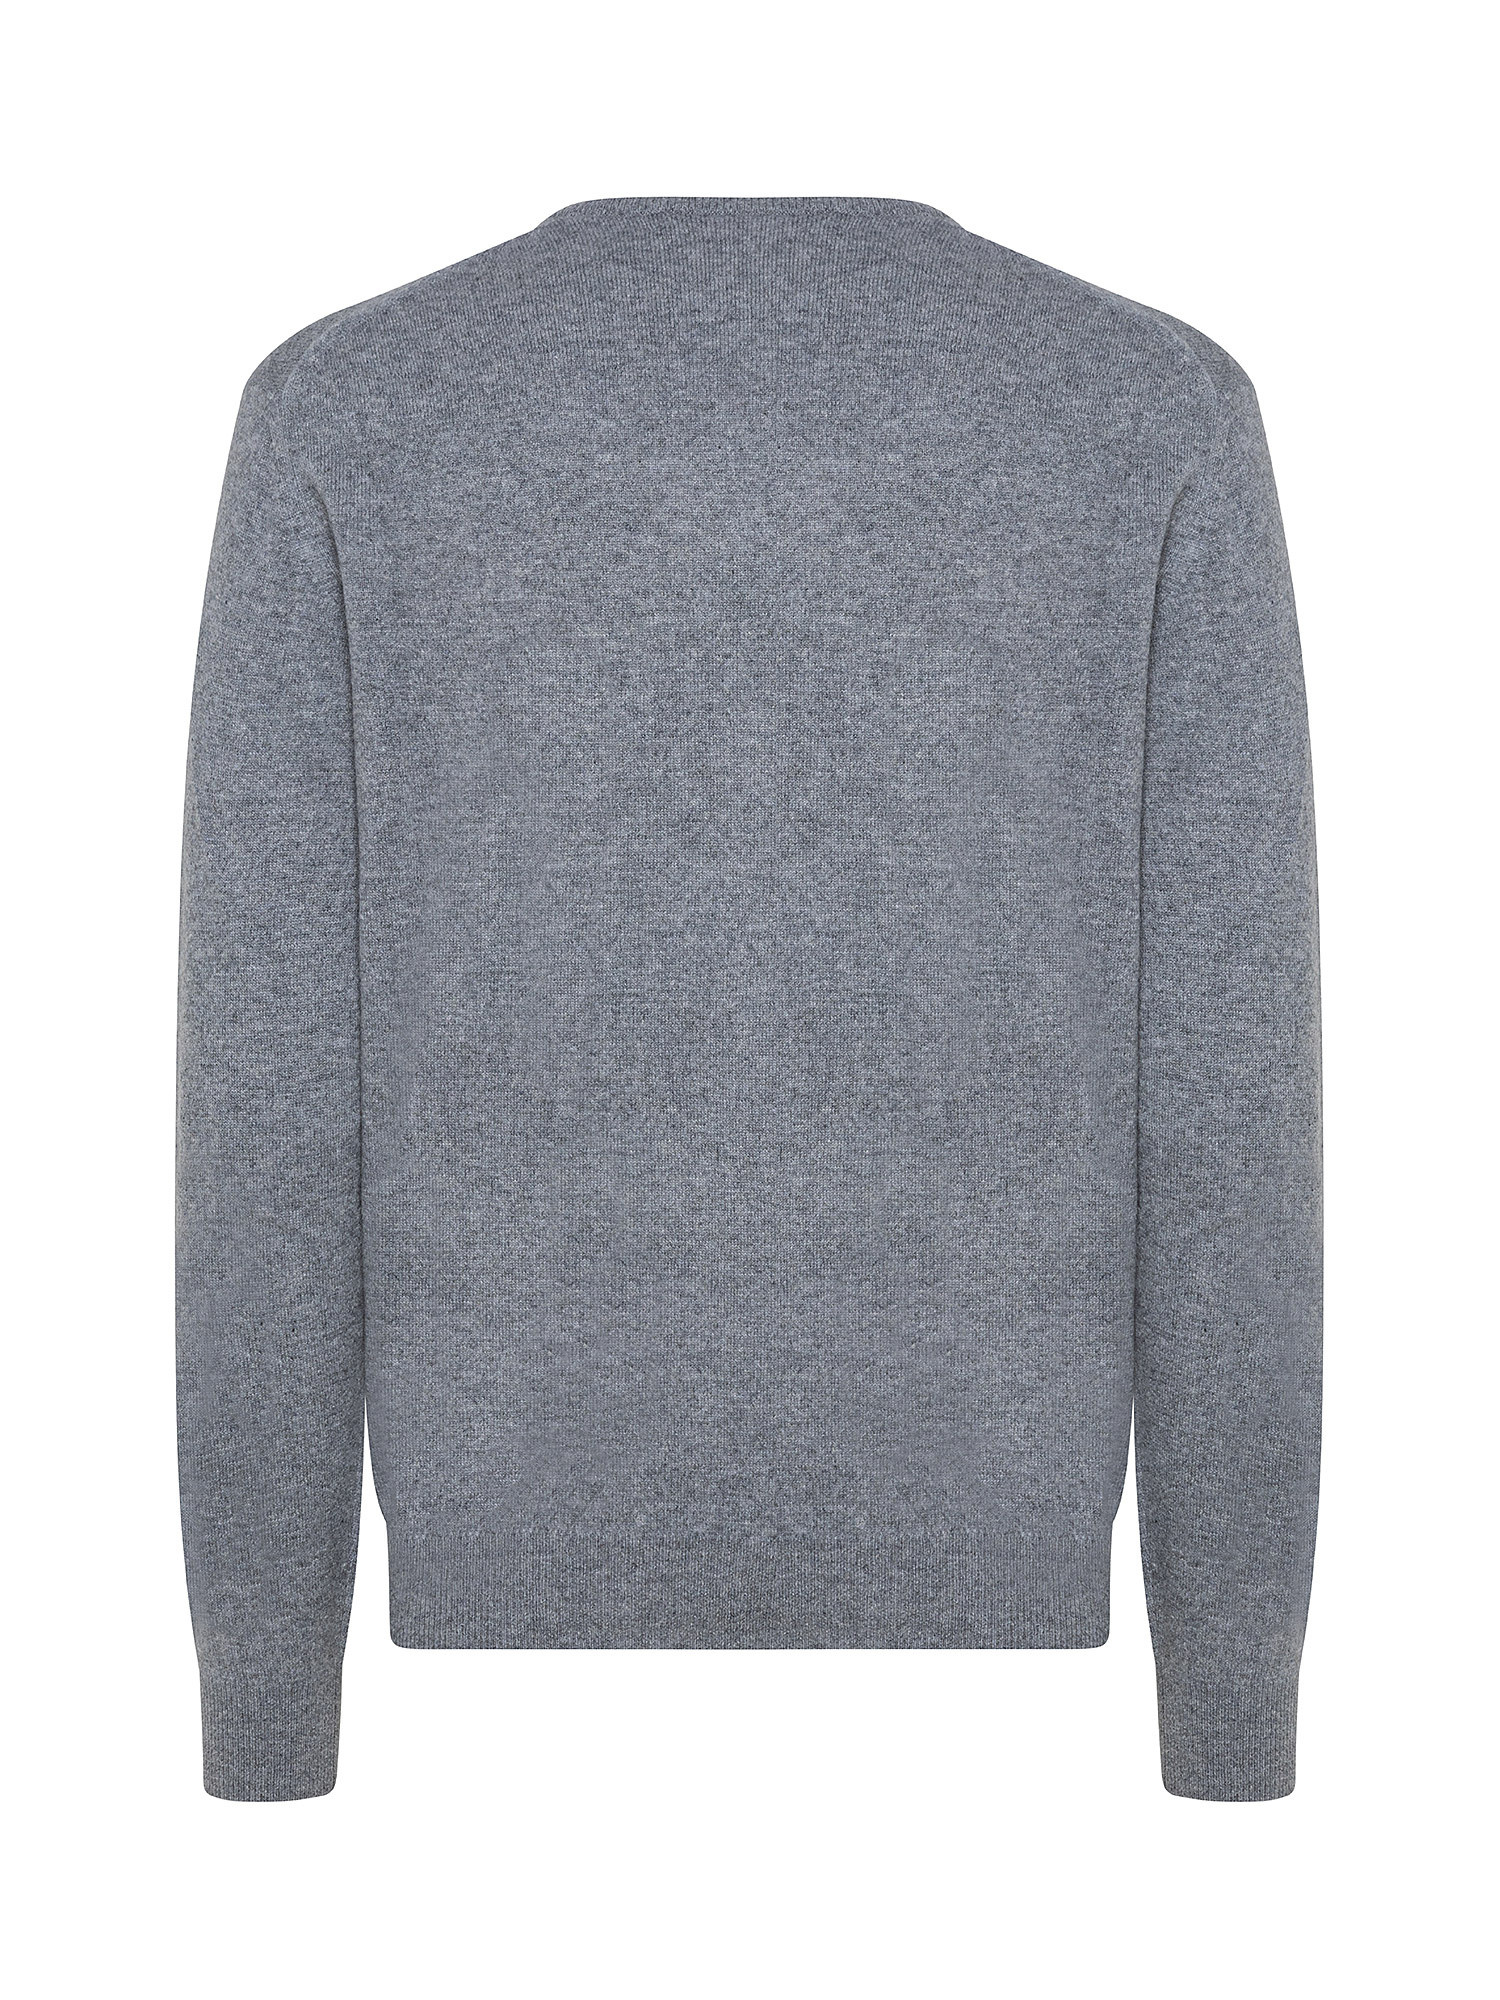 Pure cashmere pullover, Grey, large image number 1